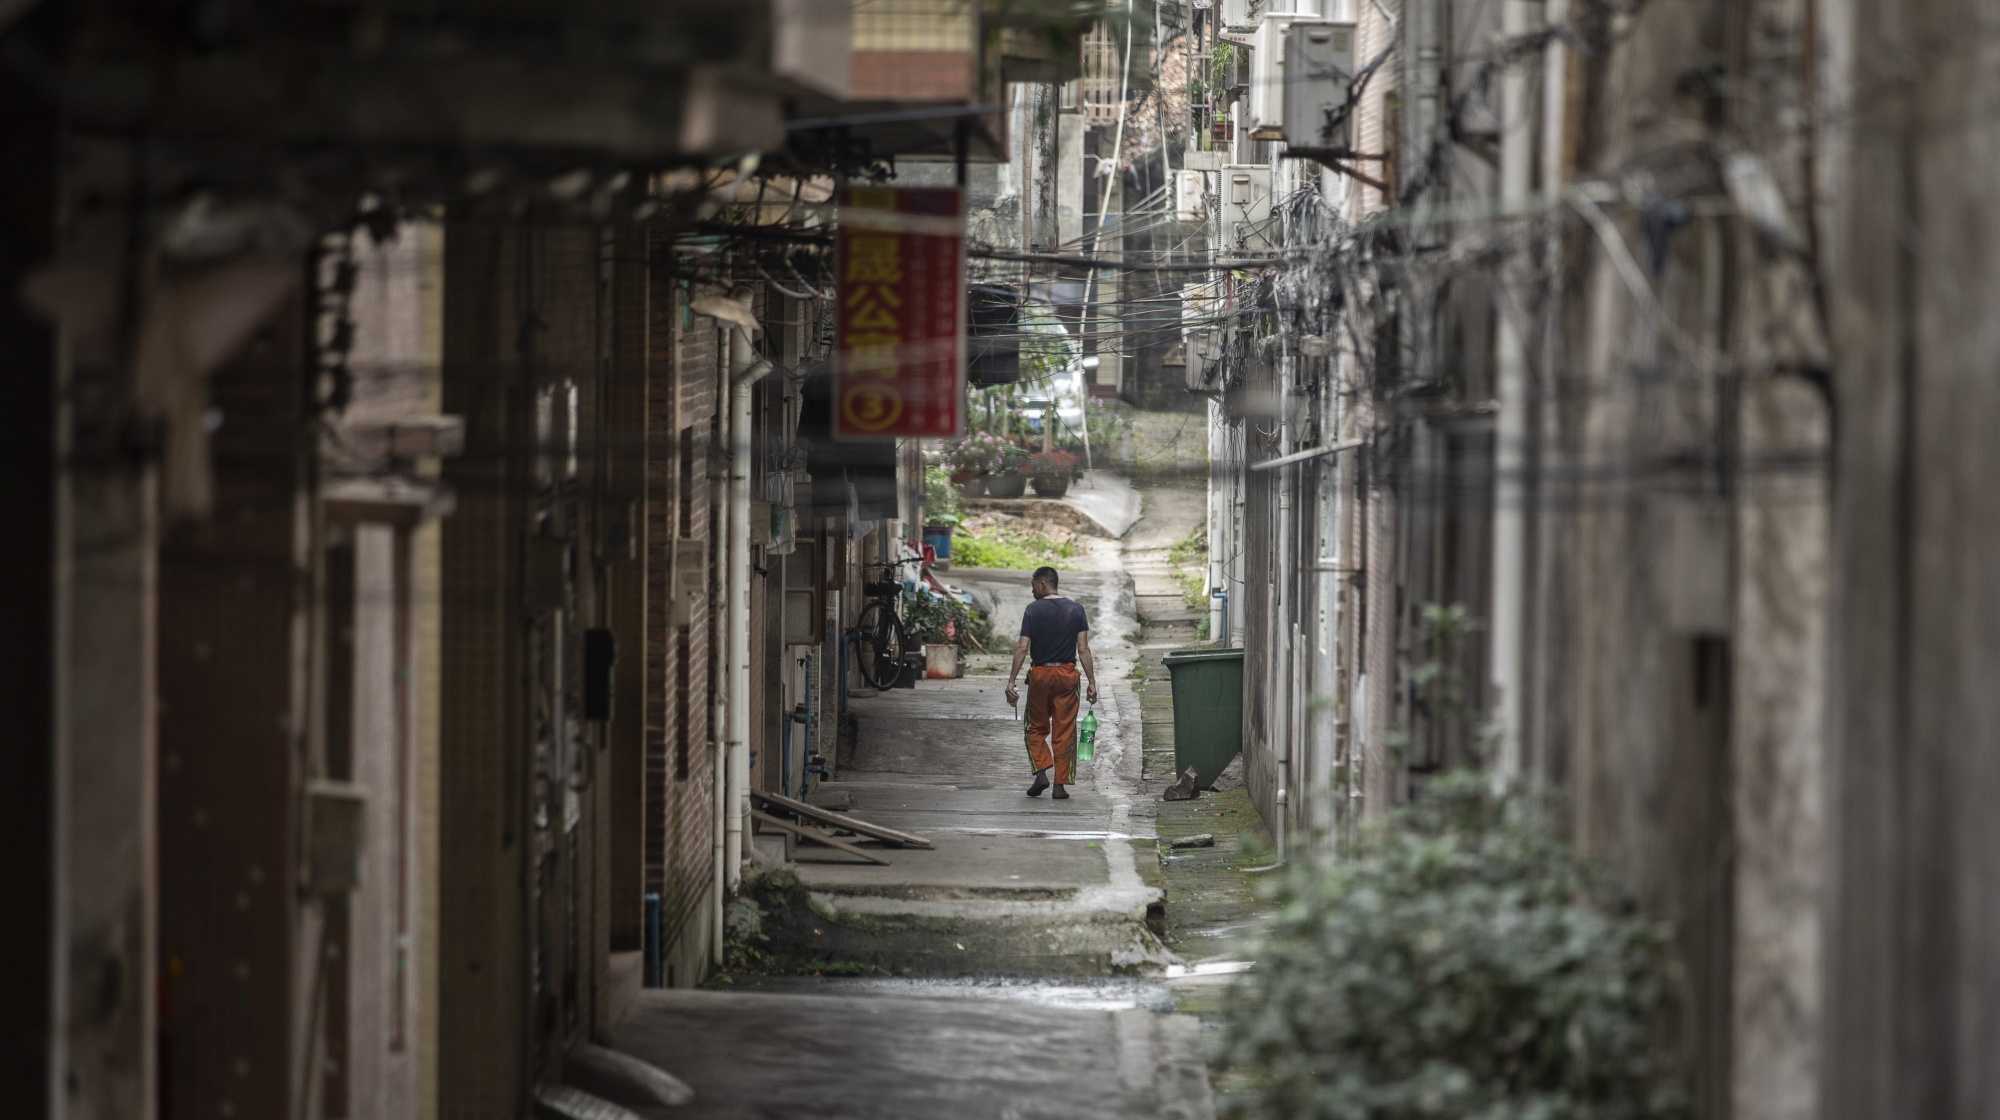 A man walks down an alley&nbsp;near a cluster of small factories in Dongguan, China.